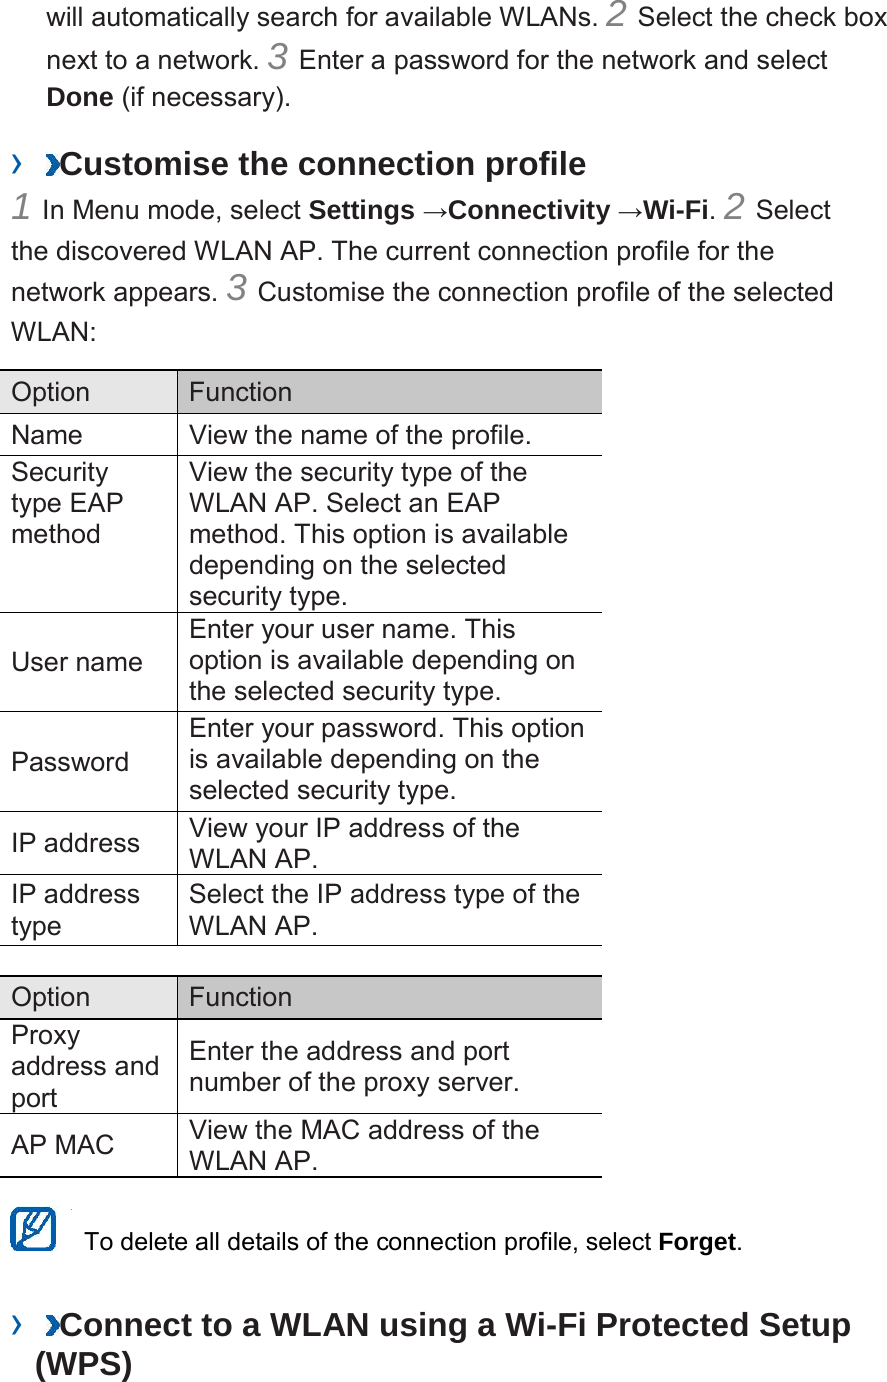 will automatically search for available WLANs. 2 Select the check box next to a network. 3 Enter a password for the network and select Done (if necessary).   ›  Customise the connection profile   1 In Menu mode, select Settings →Connectivity →Wi-Fi. 2 Select the discovered WLAN AP. The current connection profile for the network appears. 3 Customise the connection profile of the selected WLAN:   Option    Function   Name   View the name of the profile.   Security type EAP method   View the security type of the WLAN AP. Select an EAP method. This option is available depending on the selected security type.   User name   Enter your user name. This option is available depending on the selected security type.   Password   Enter your password. This option is available depending on the selected security type.   IP address   View your IP address of the WLAN AP.   IP address type   Select the IP address type of the WLAN AP.    Option    Function   Proxy address and port   Enter the address and port number of the proxy server.   AP MAC   View the MAC address of the WLAN AP.     To delete all details of the connection profile, select Forget.   ›  Connect to a WLAN using a Wi-Fi Protected Setup (WPS)   